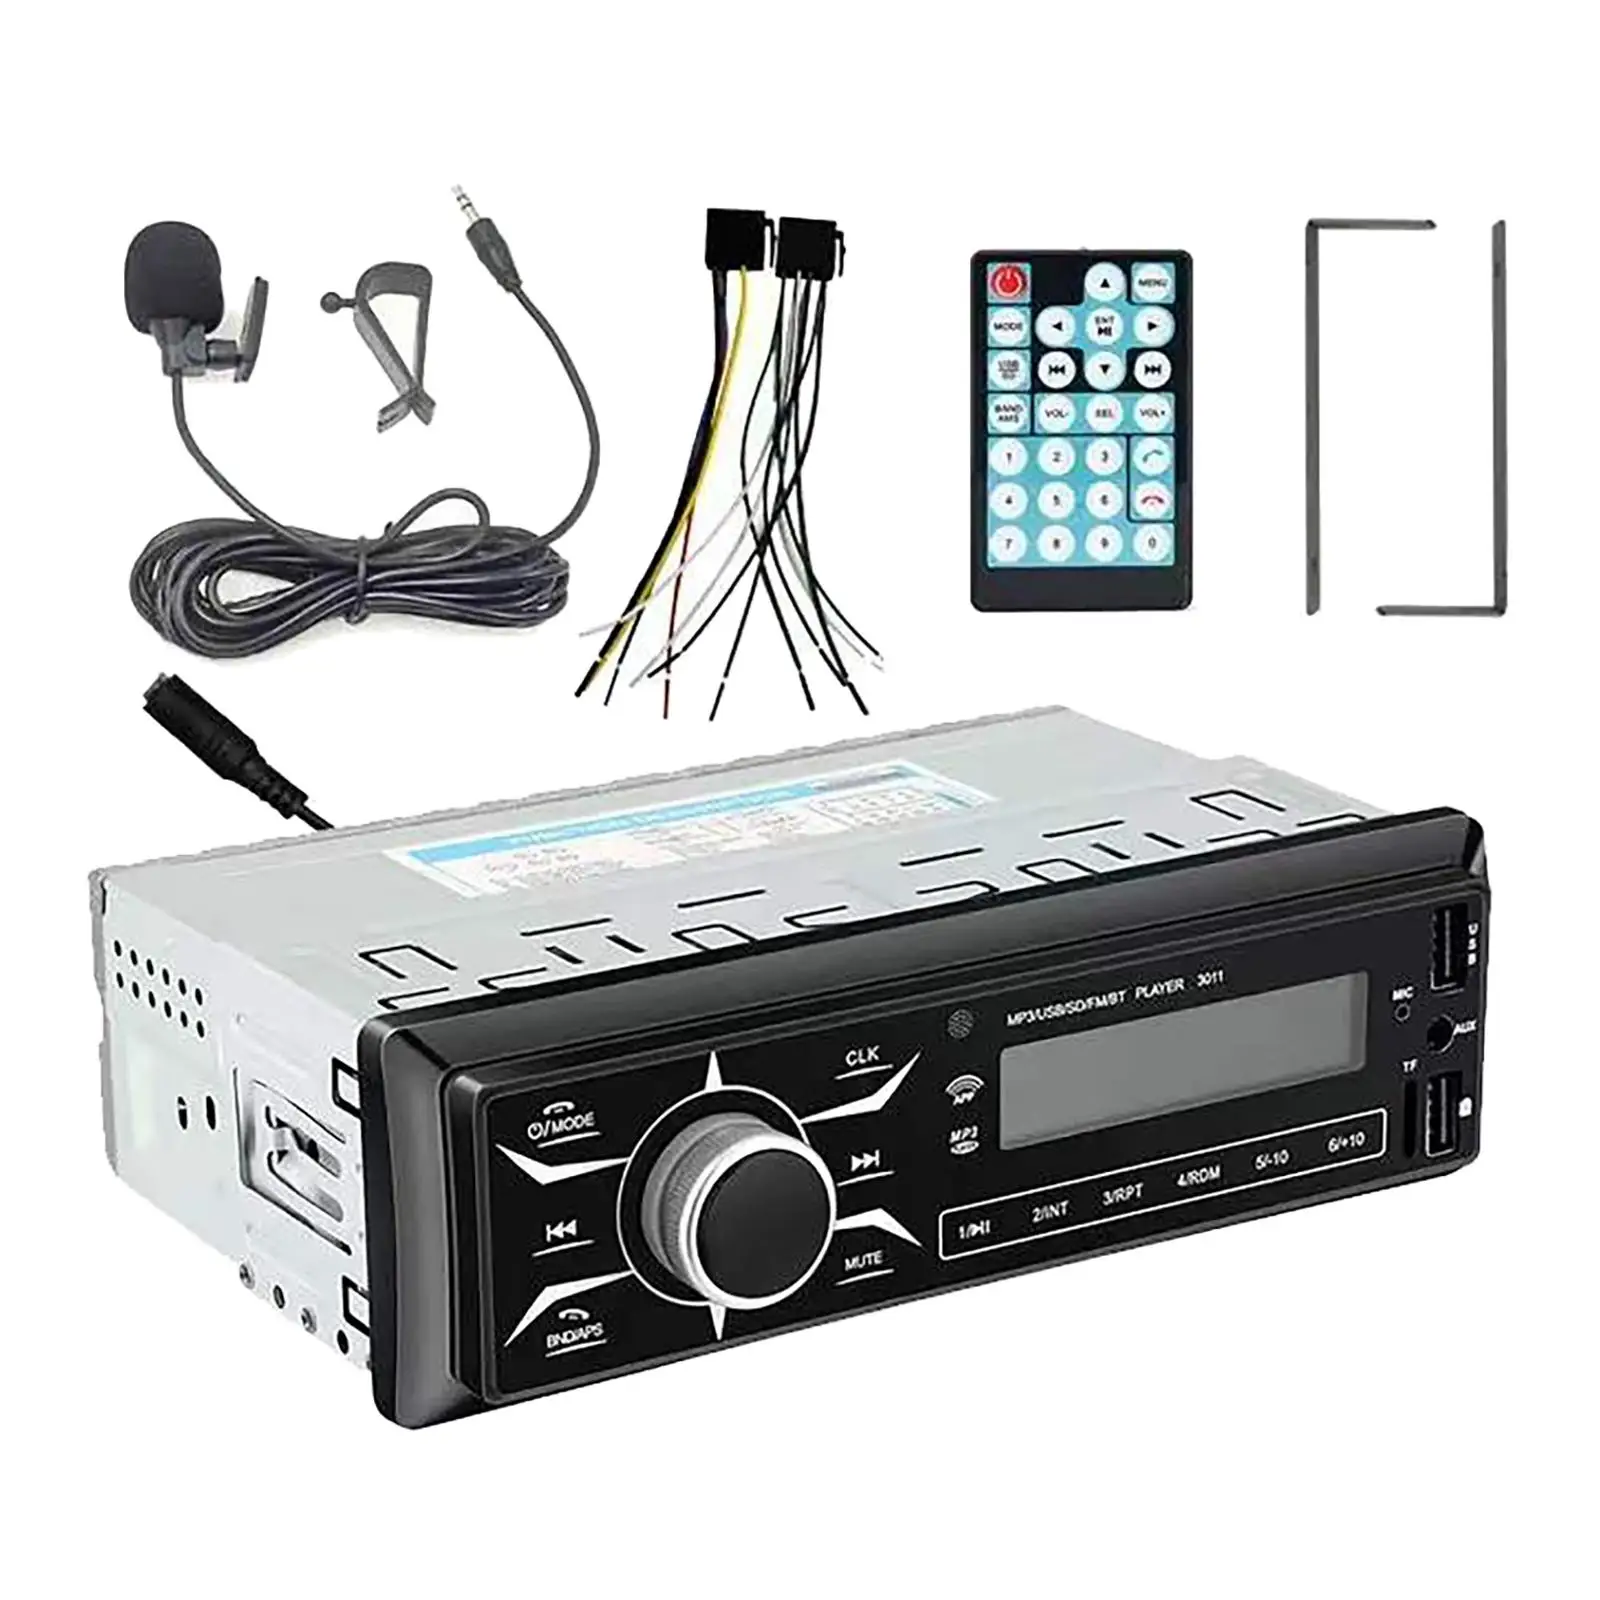 Bluetooth 4.0 Car MP3 Player 24V FM Radio Hands-Free Calling Audio Stereo Voice Assistant Music for Vehicles Cars